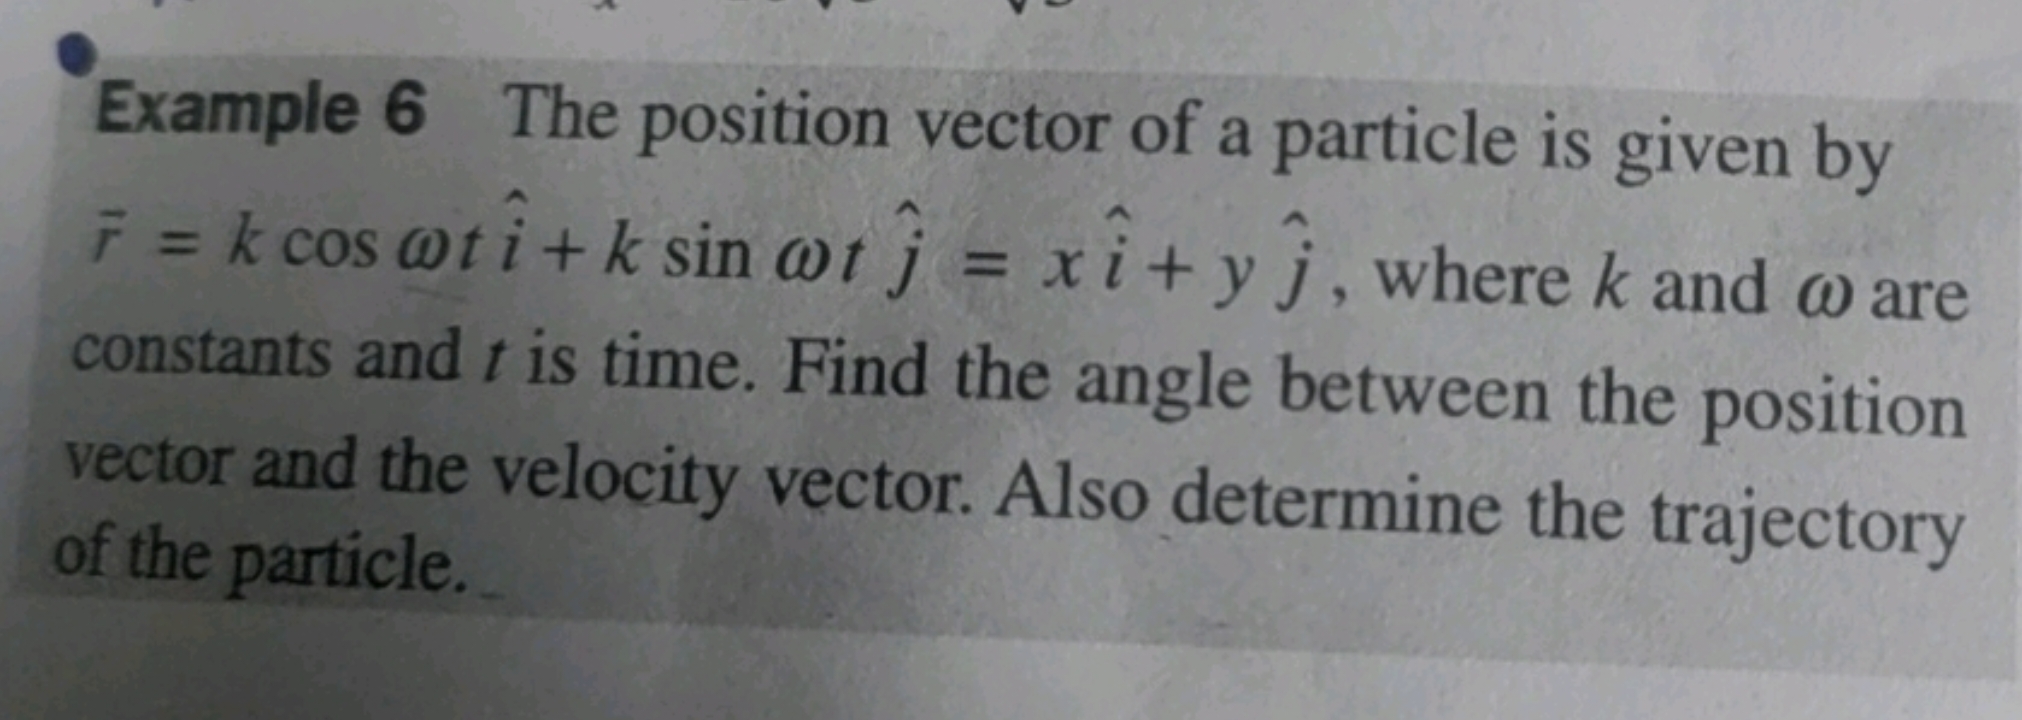 Example 6 The position vector of a particle is given by r=kcosωti^+ksi